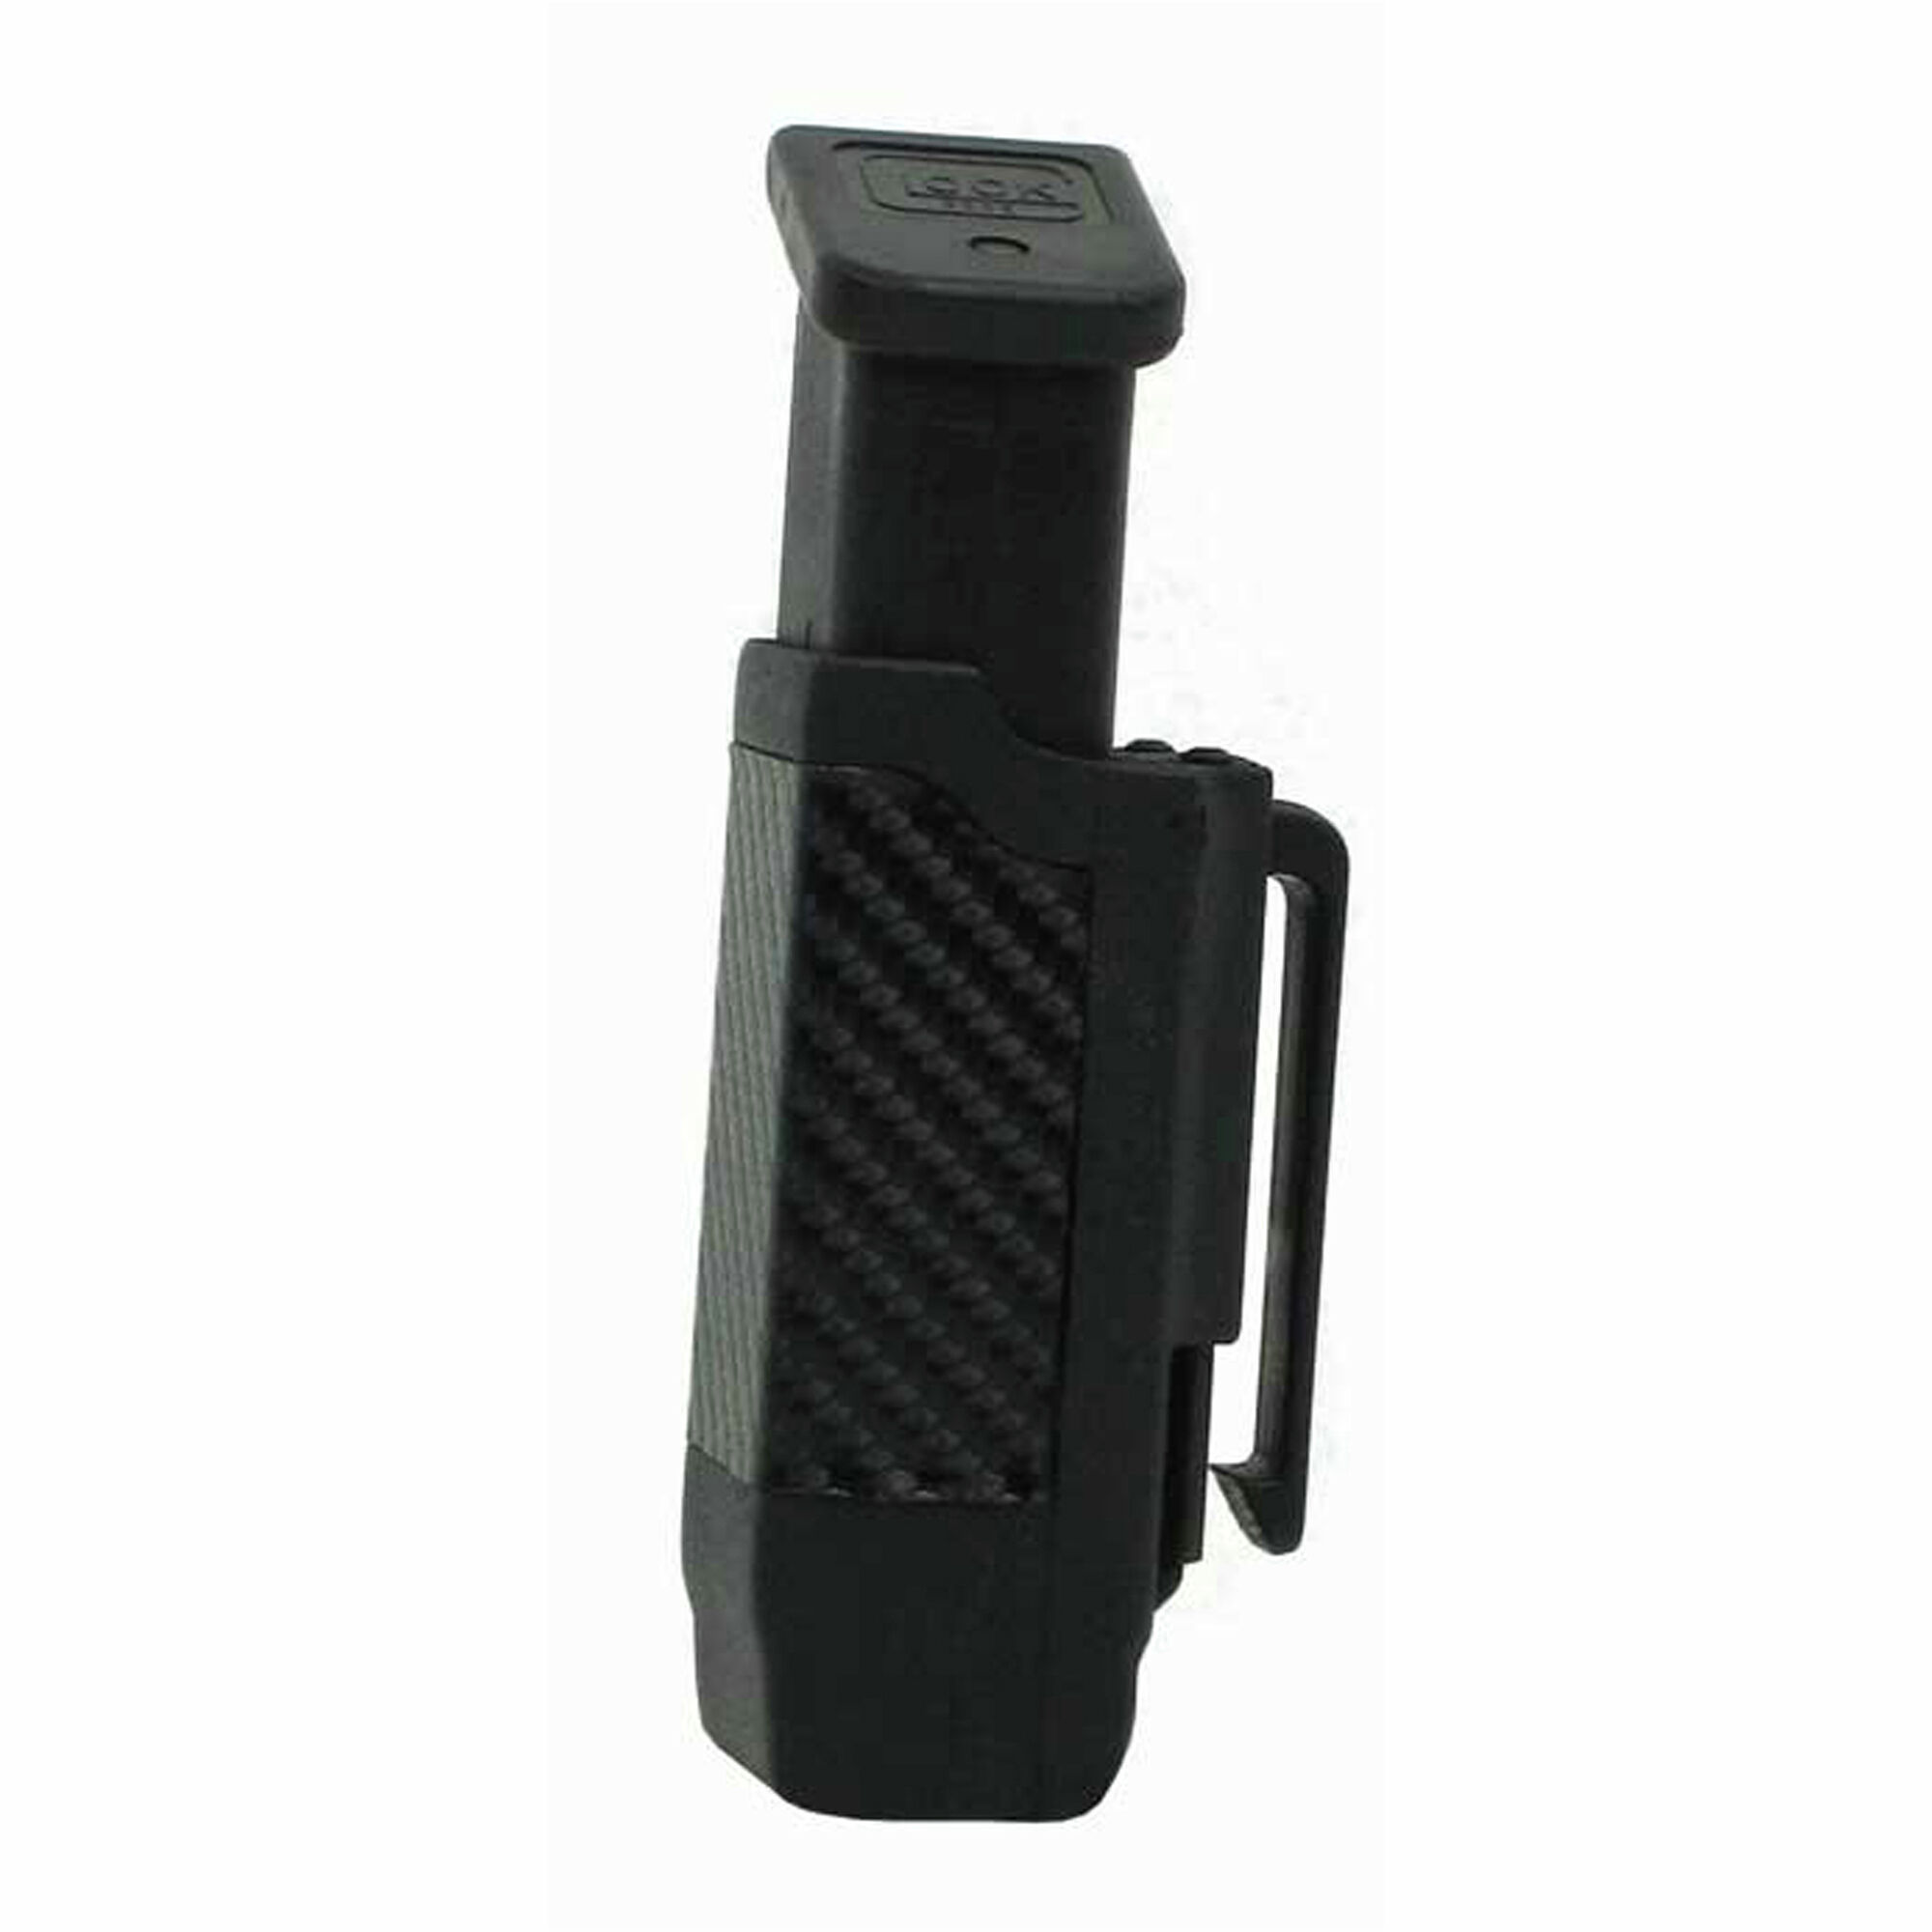 US Stock CQC Double Stack Magazine Holder Pouch for Glock 9mm To .45 Caliber 